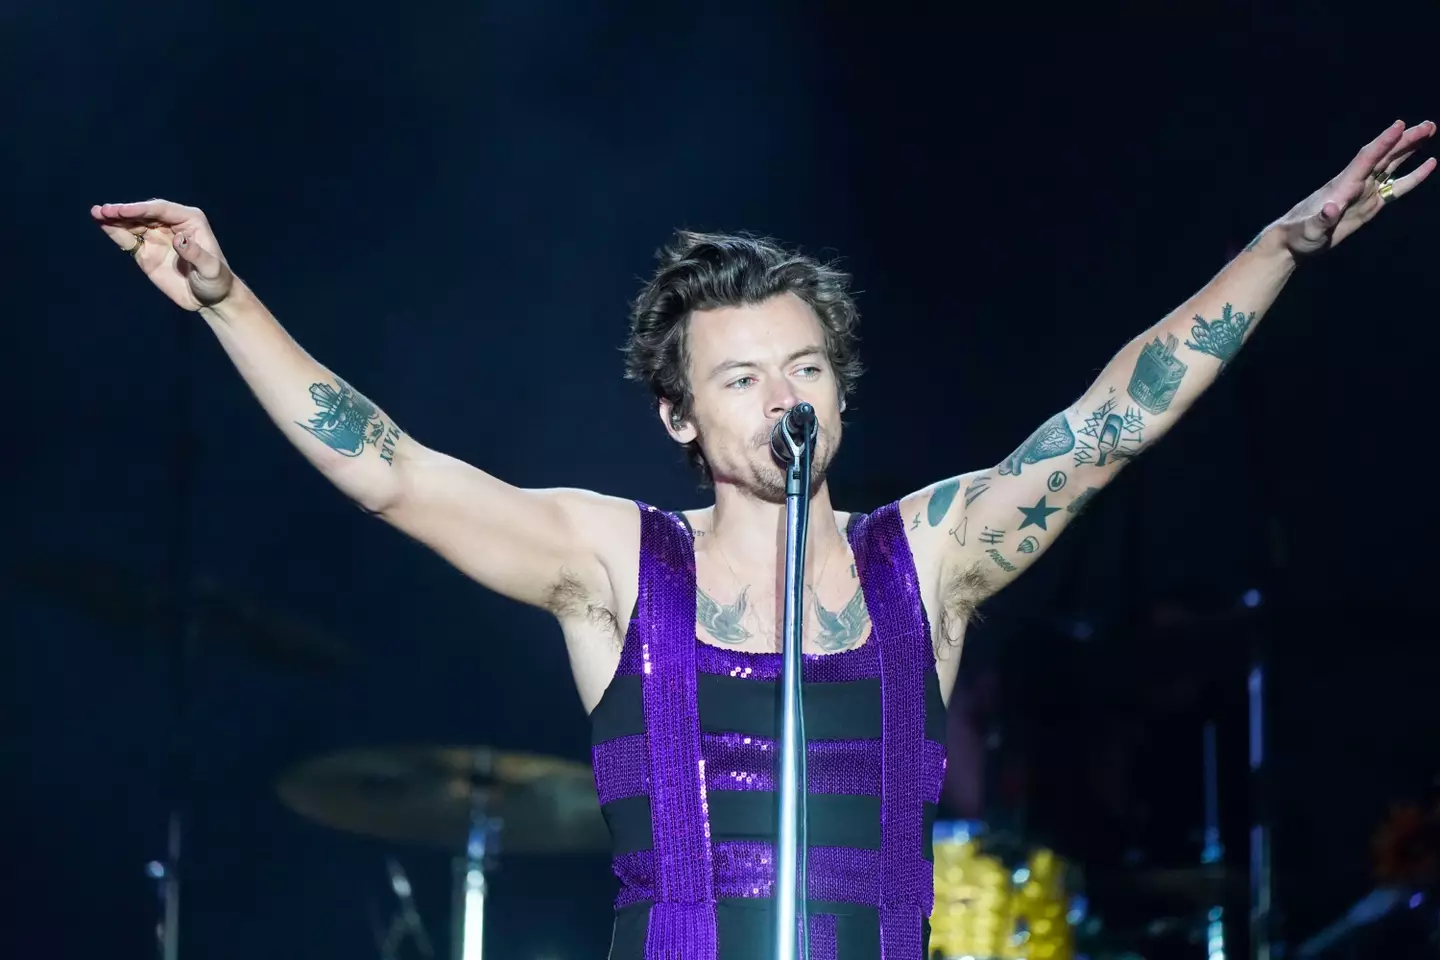 Harry Styles' concert was canceled following the deadly shooting.